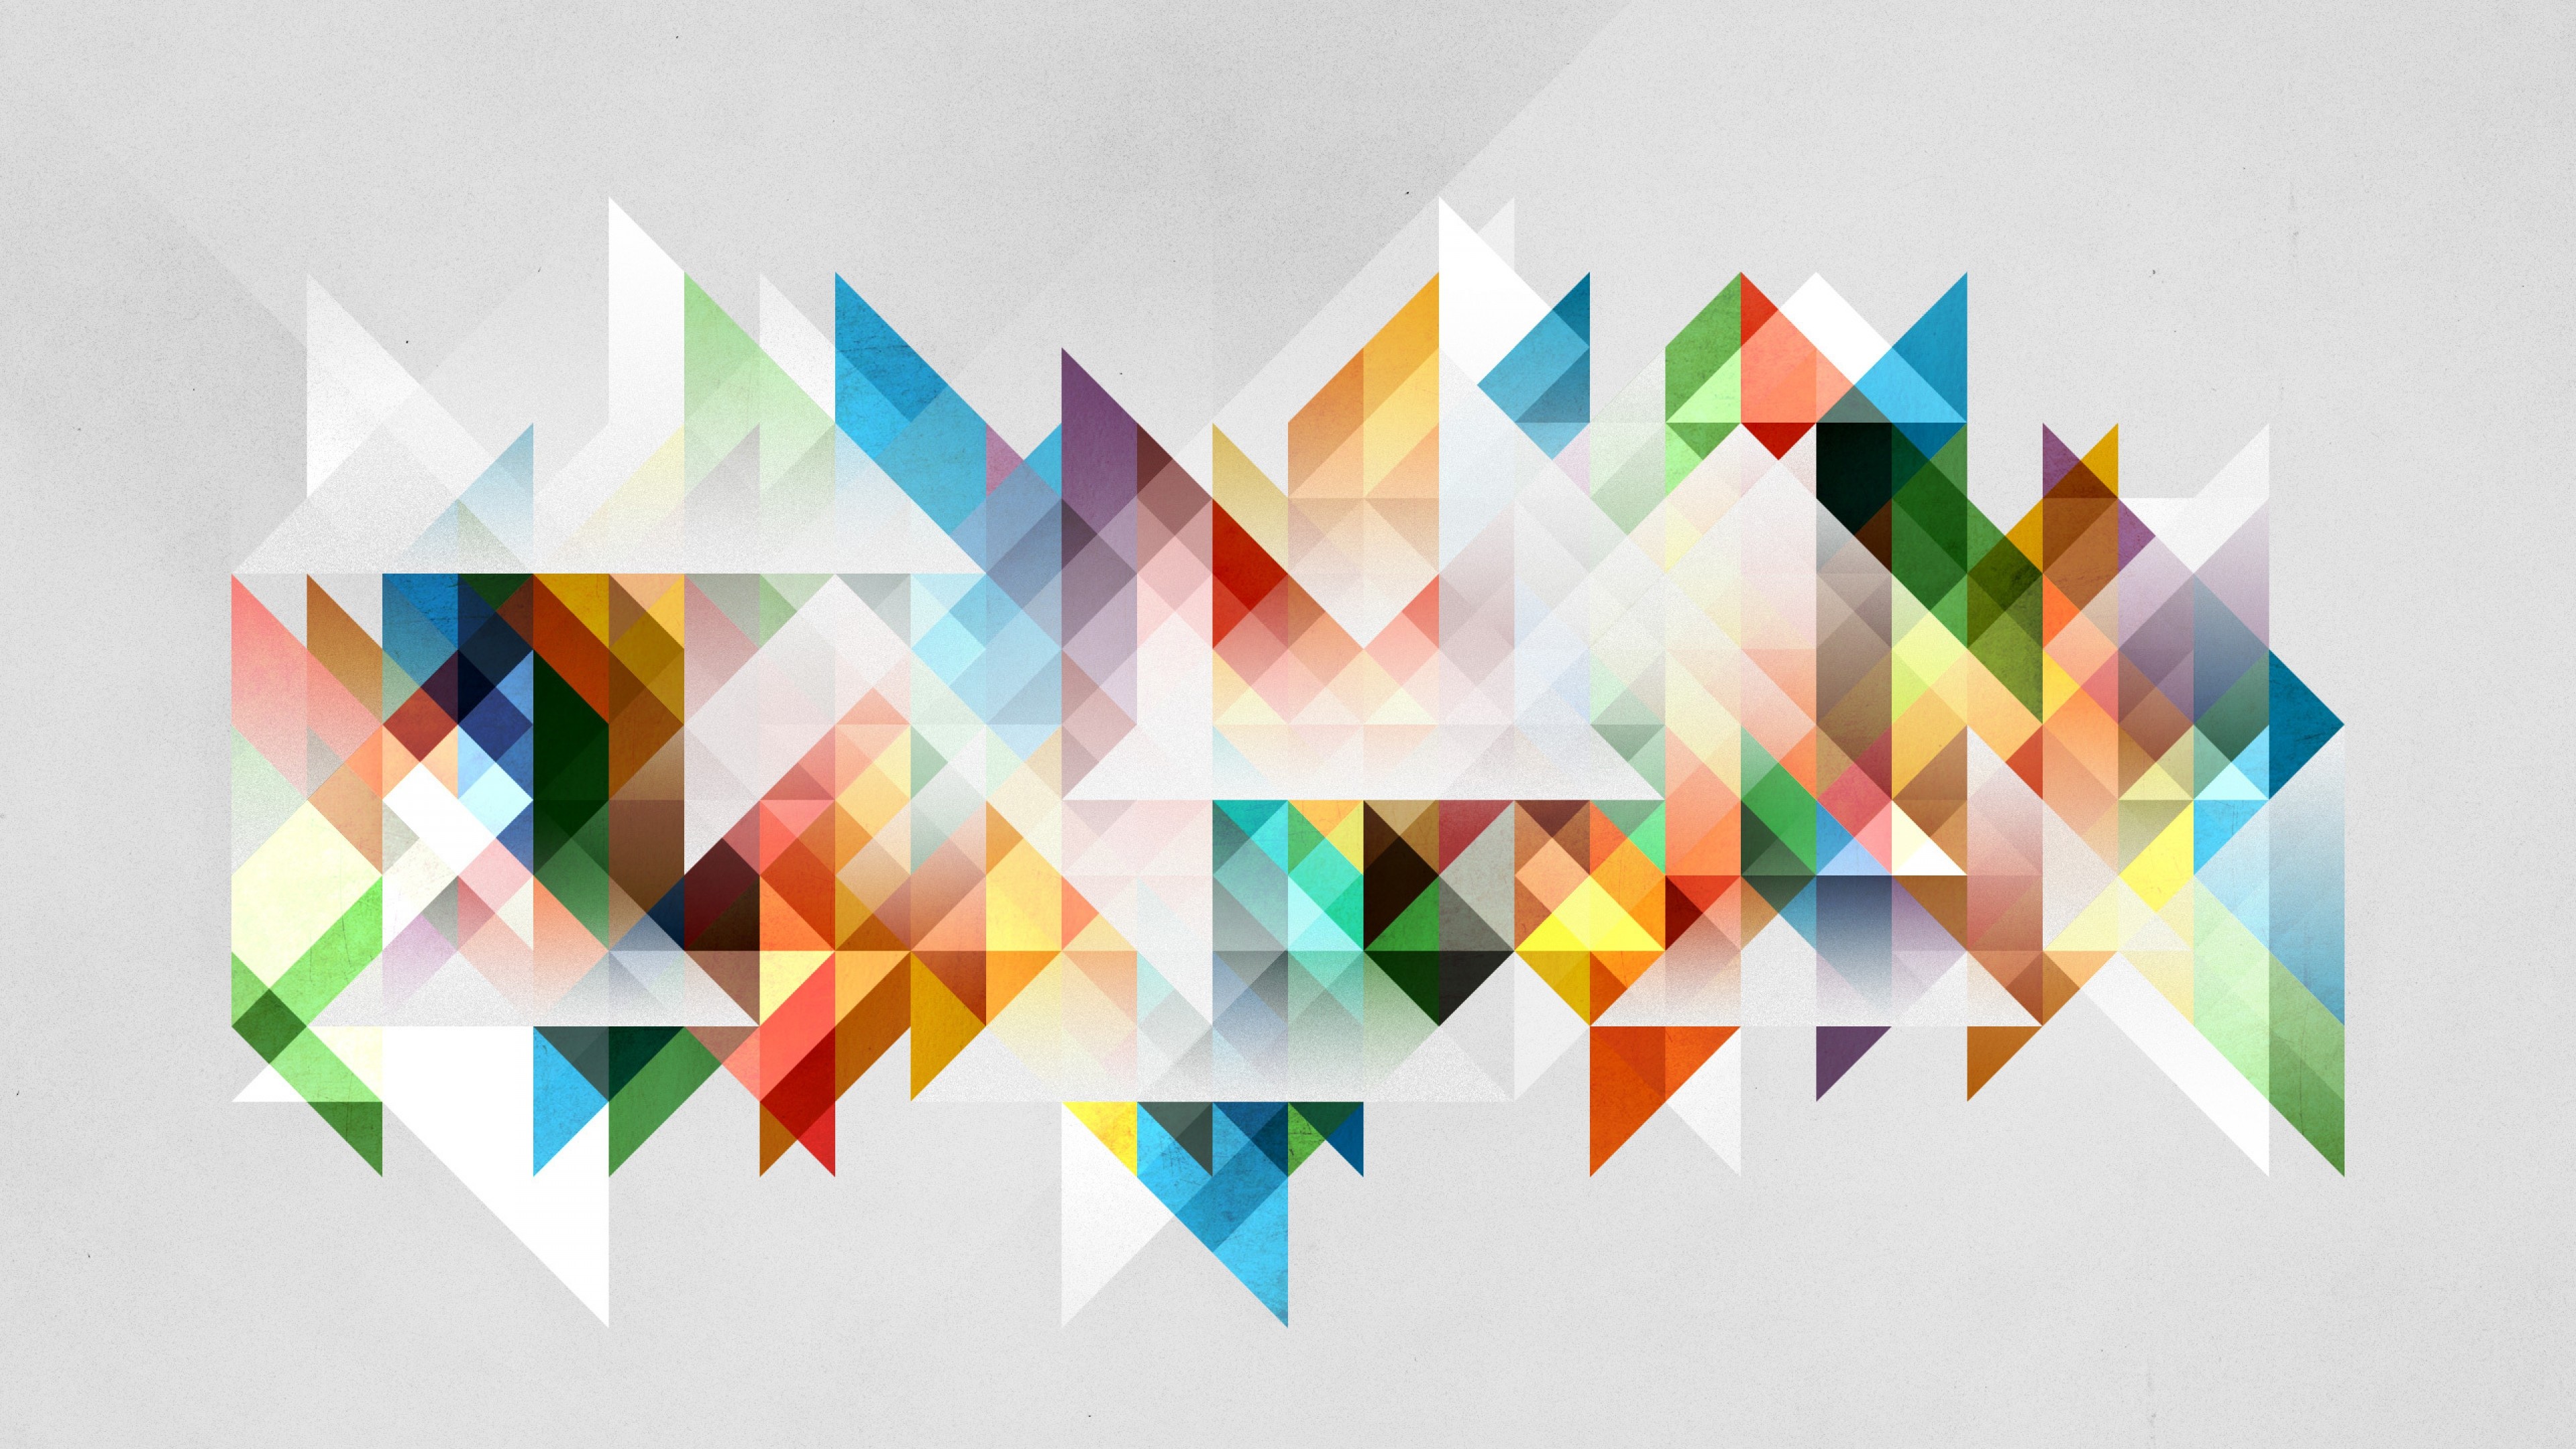 3840x2160 4k Abstraction Geometry Shapes Wallpaper for desktop and mobile phones.